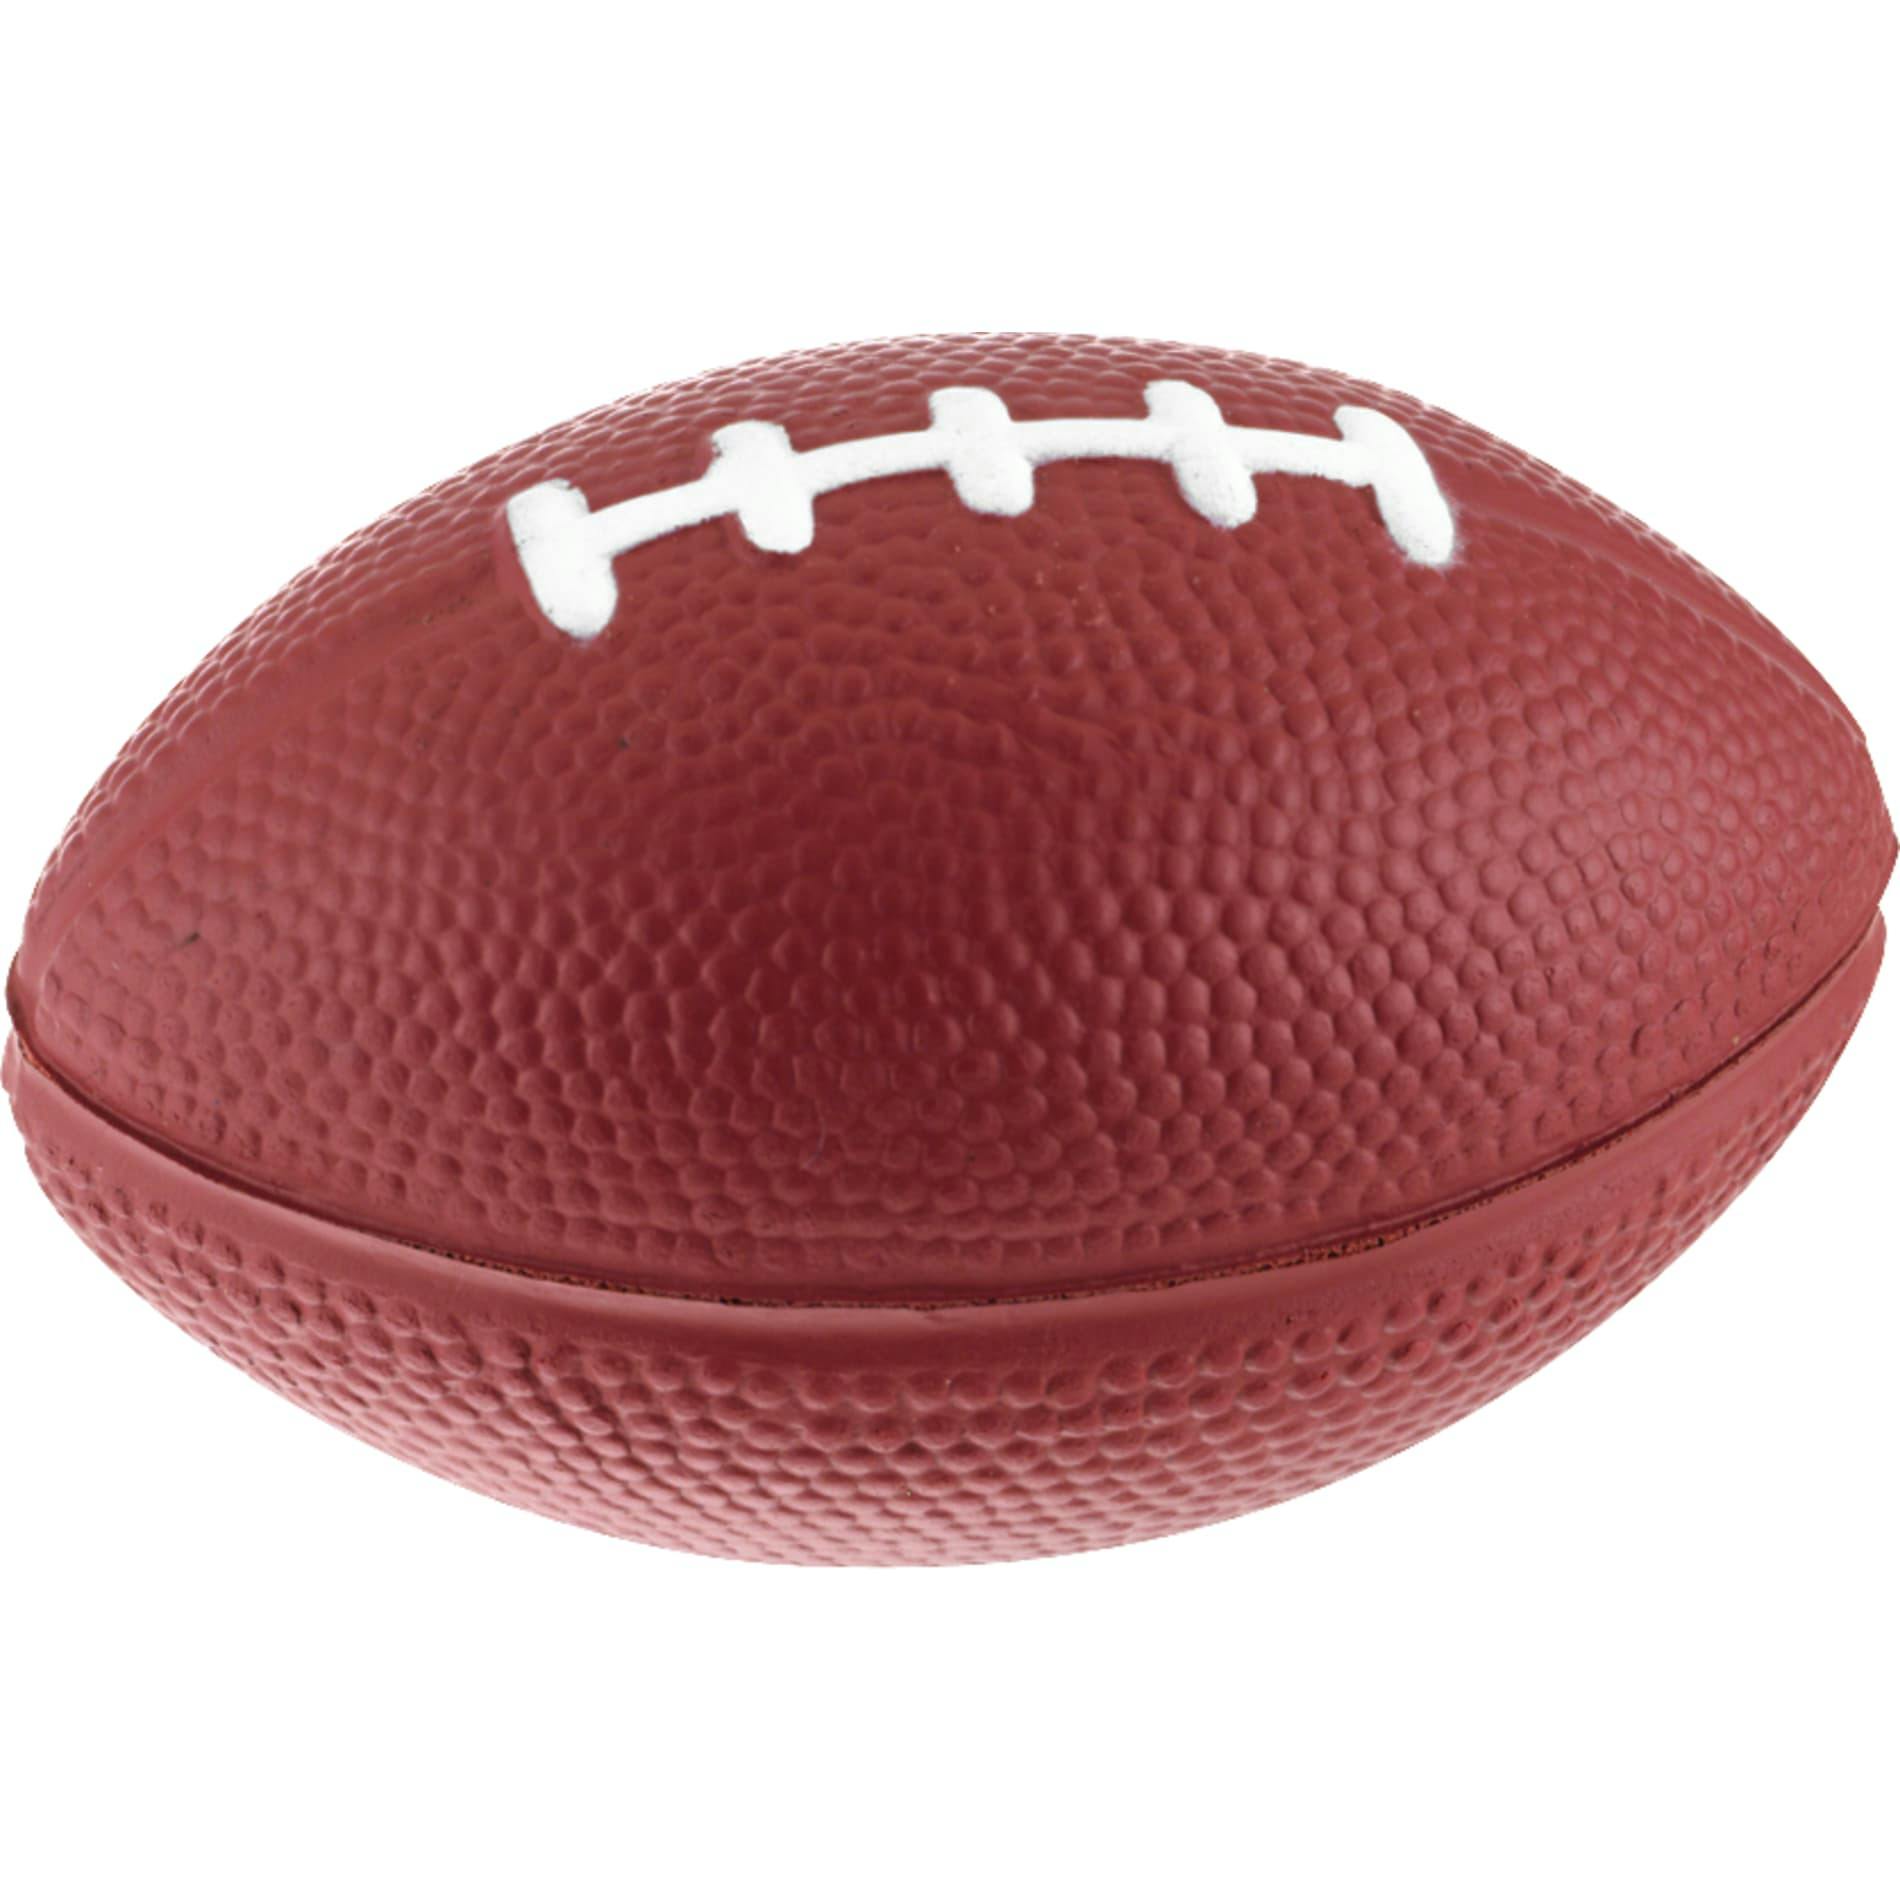 3-1/2" Football Stress Reliever - additional Image 1